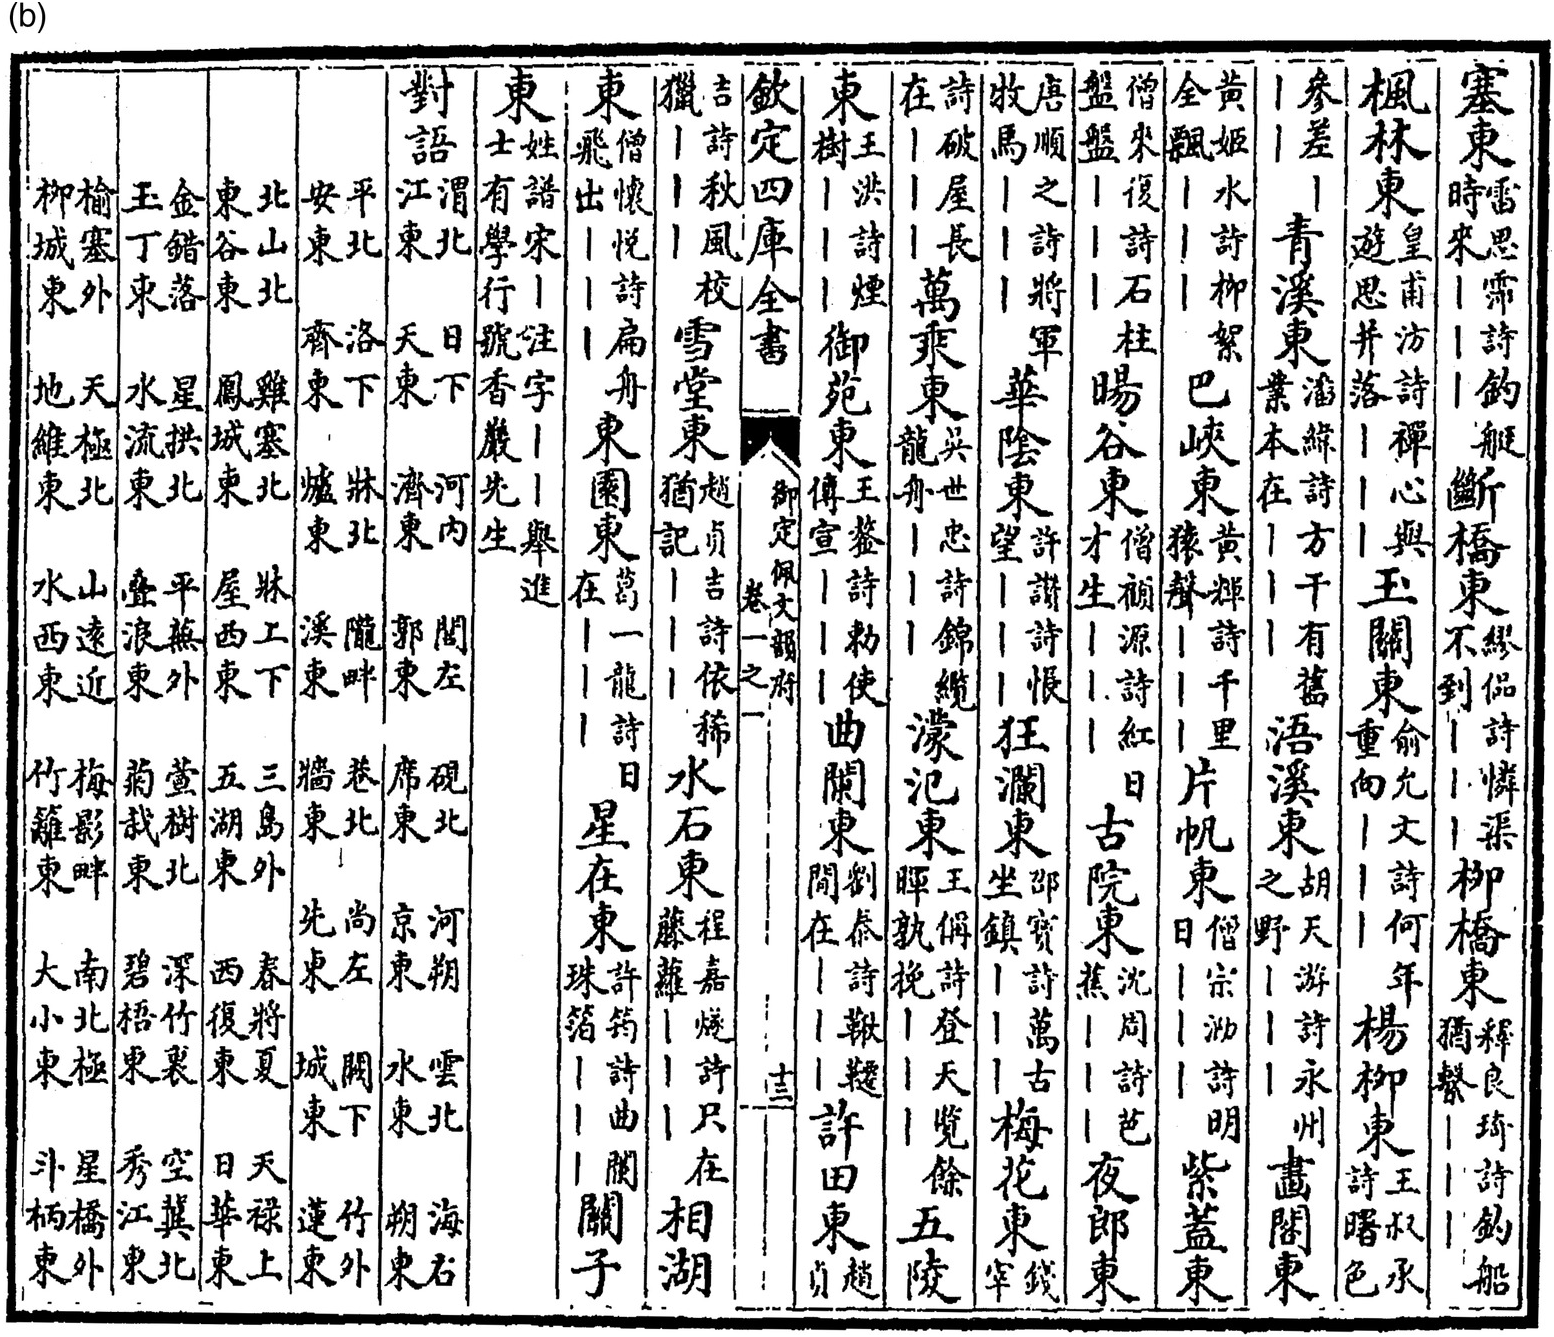 The Mandarin Of The Qing Dynasty And The Modern Era Chapter 10 A Phonological History Of Chinese